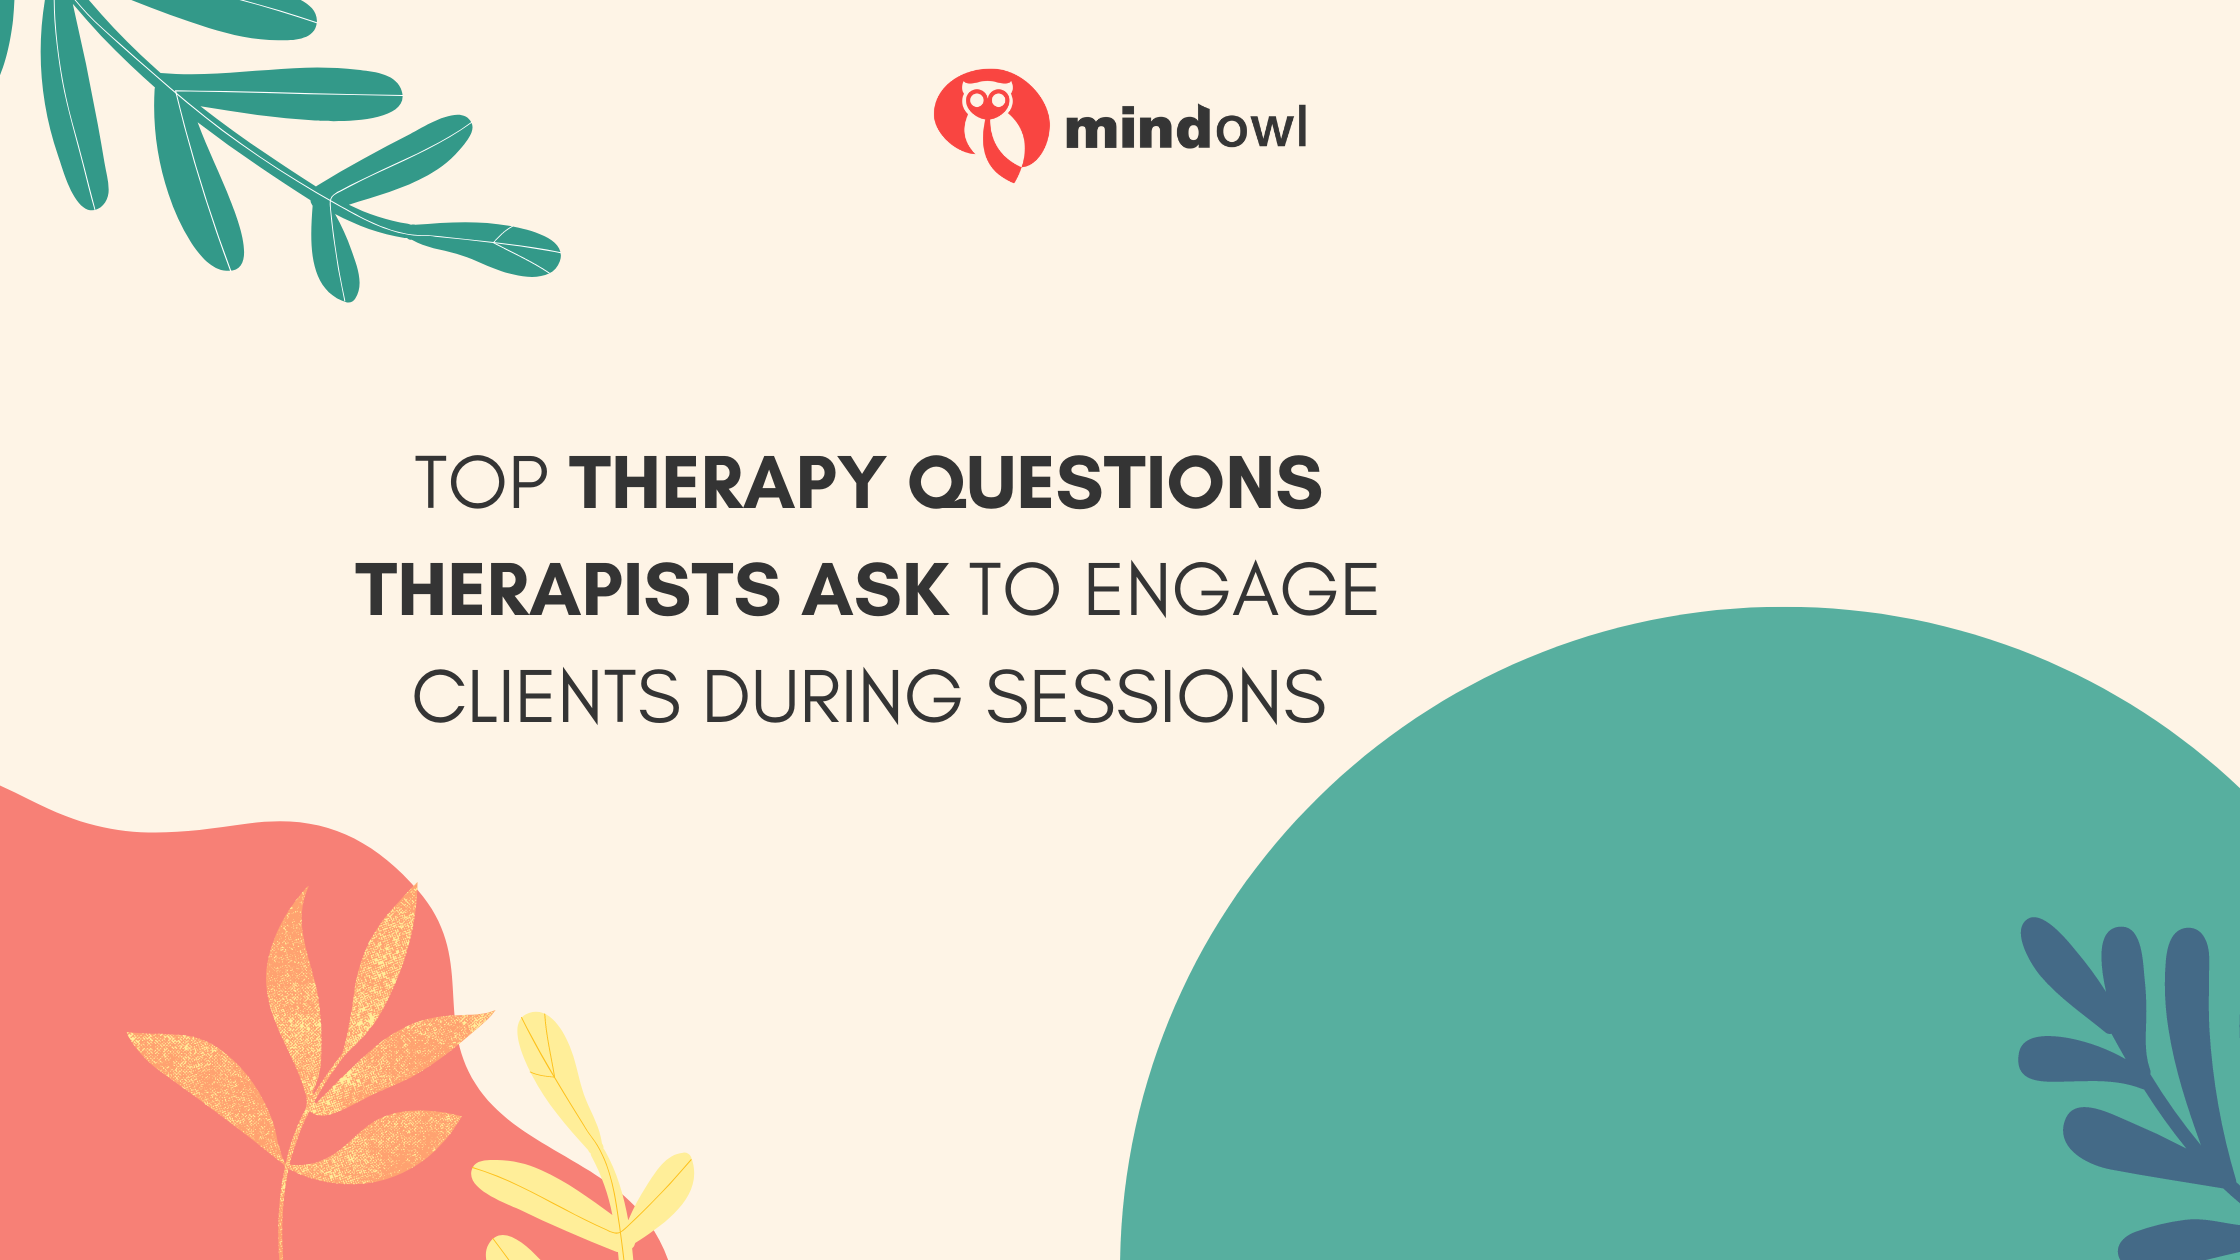 Top Therapy Questions Therapists Ask to Engage Clients During Sessions